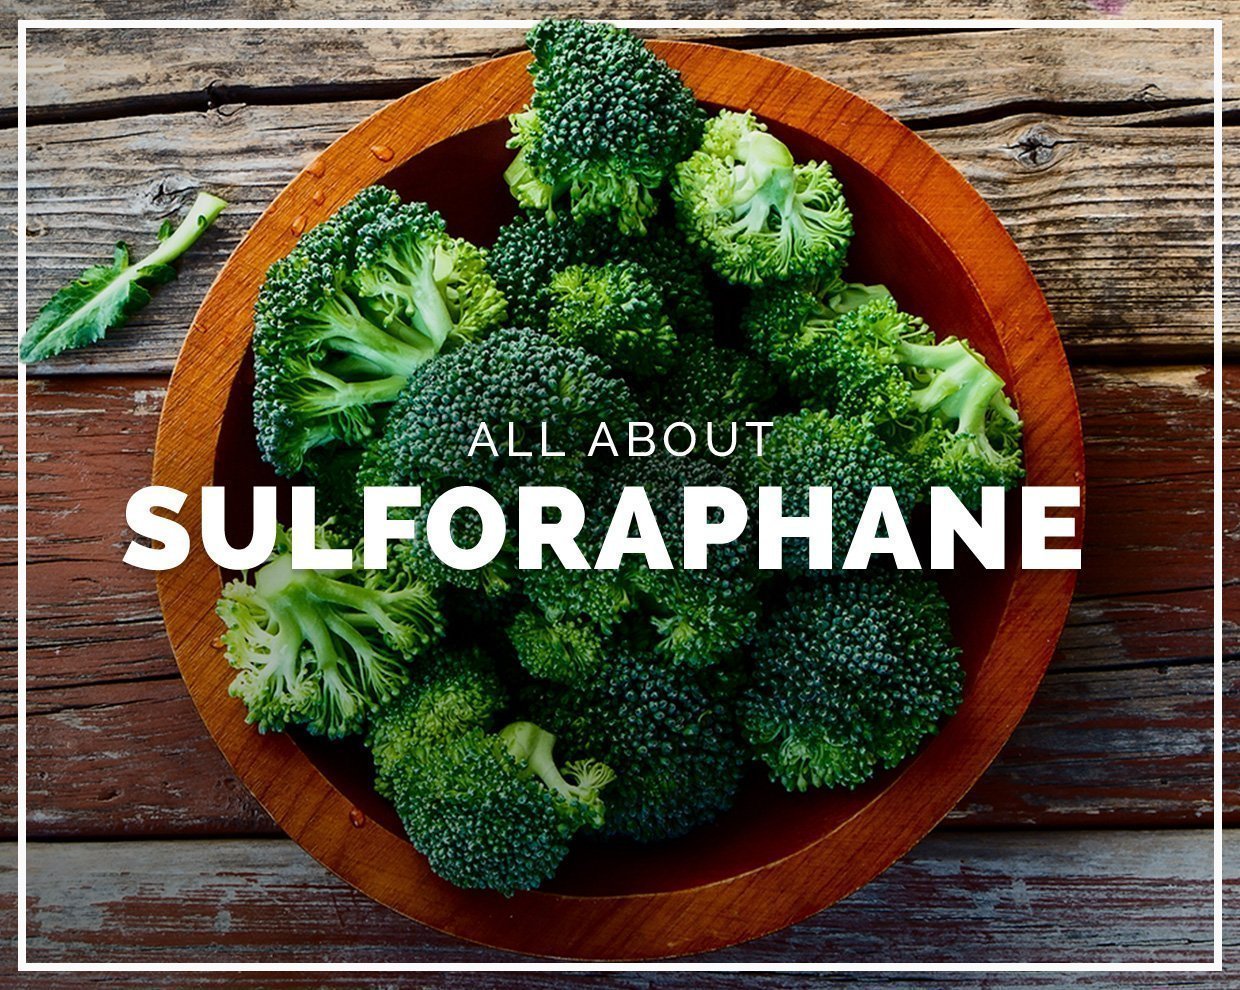 All about Sulforaphane